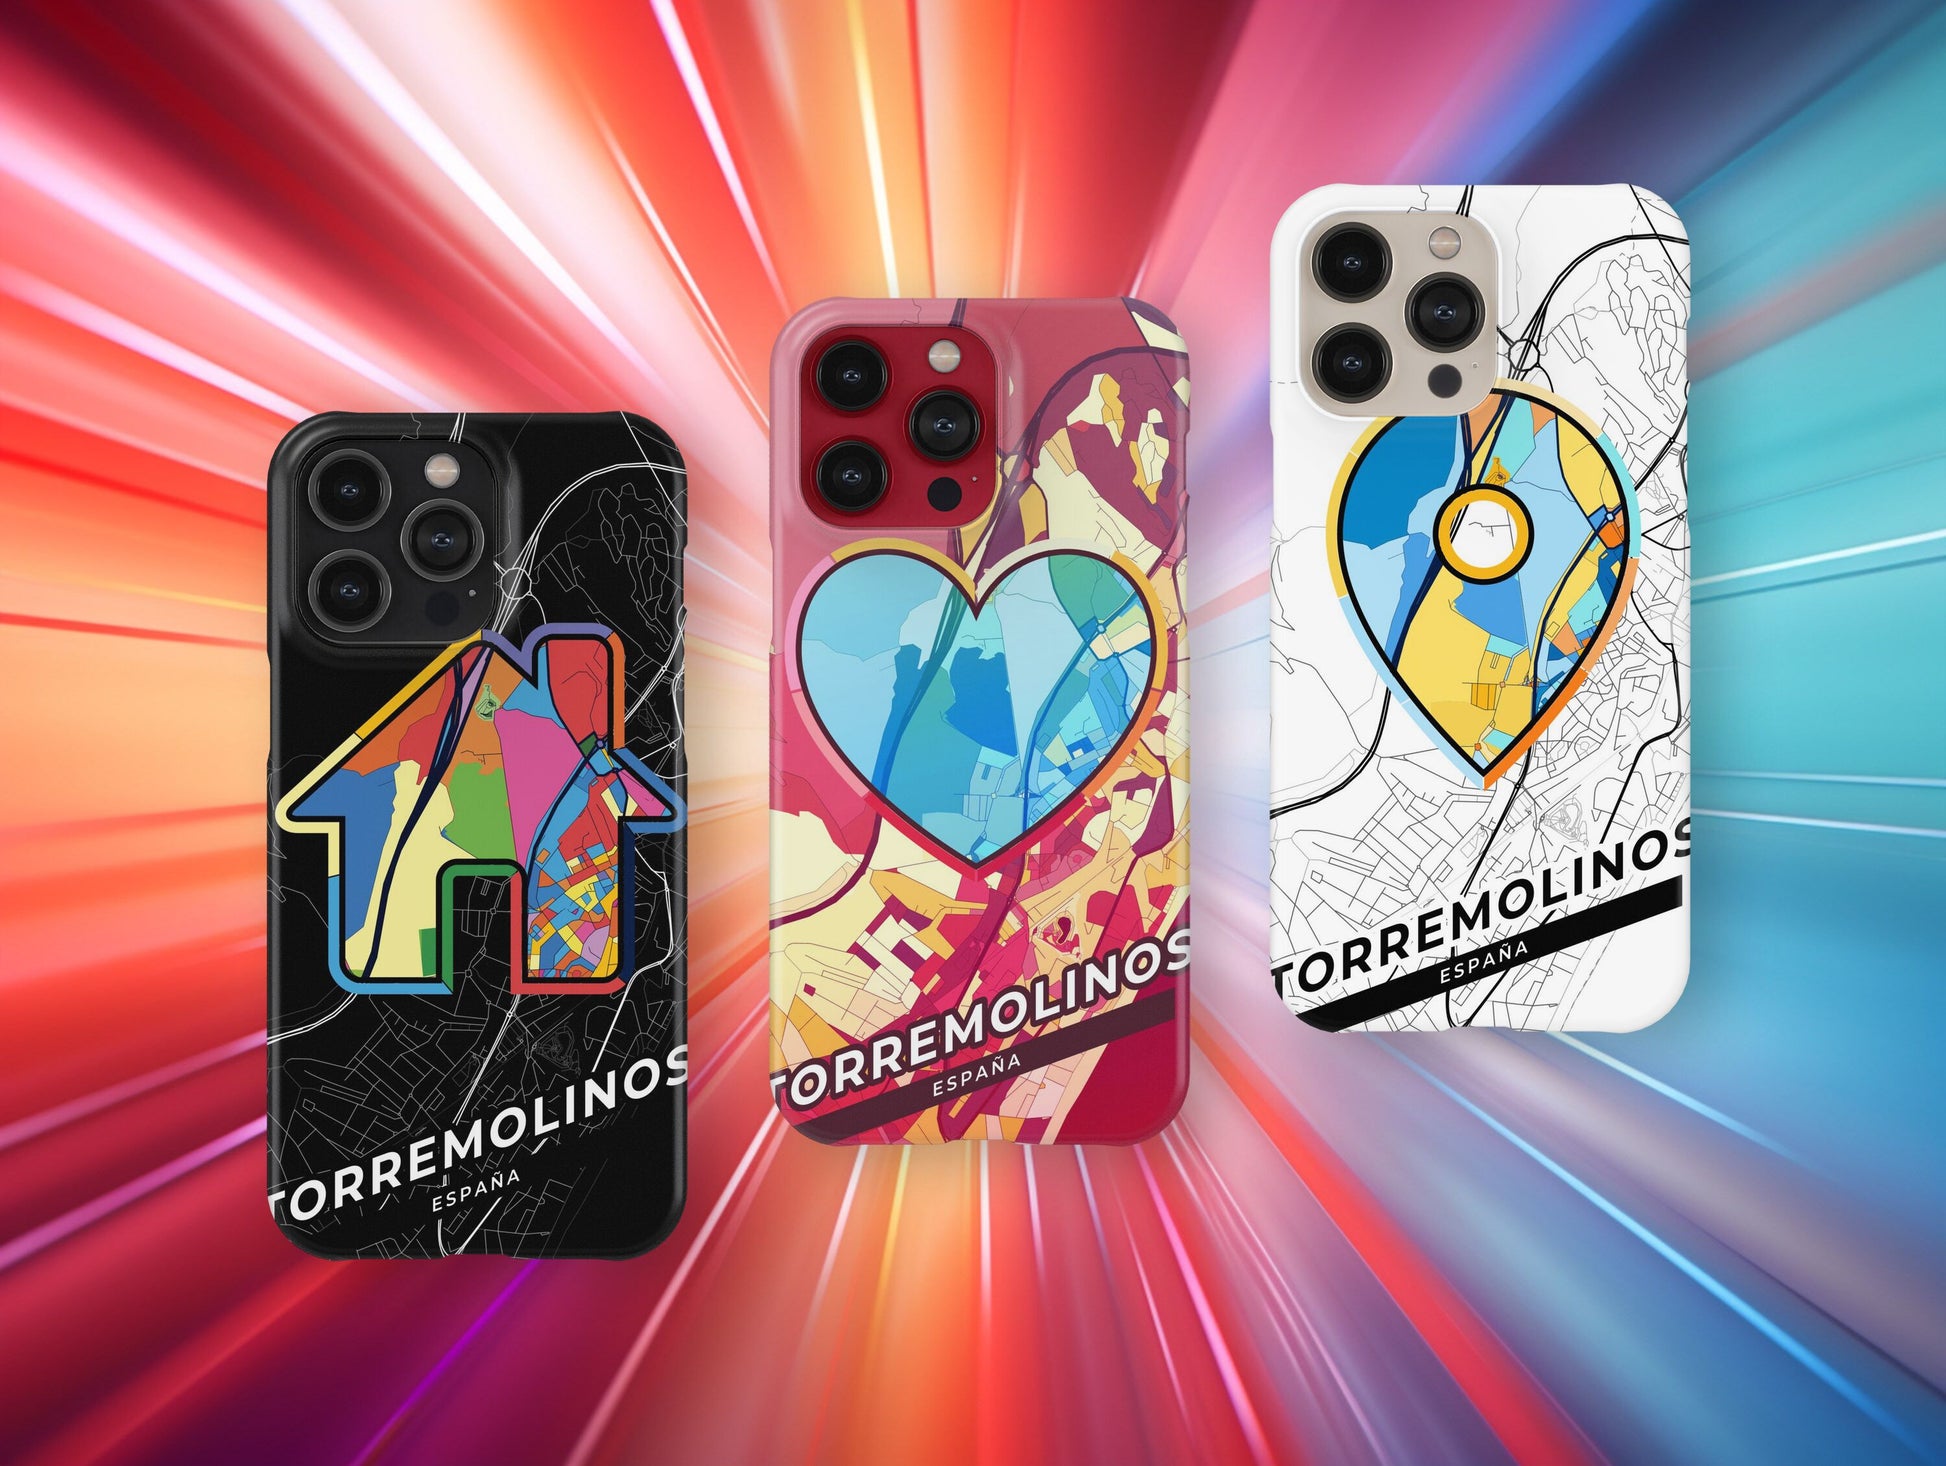 Torremolinos Spain slim phone case with colorful icon. Birthday, wedding or housewarming gift. Couple match cases.